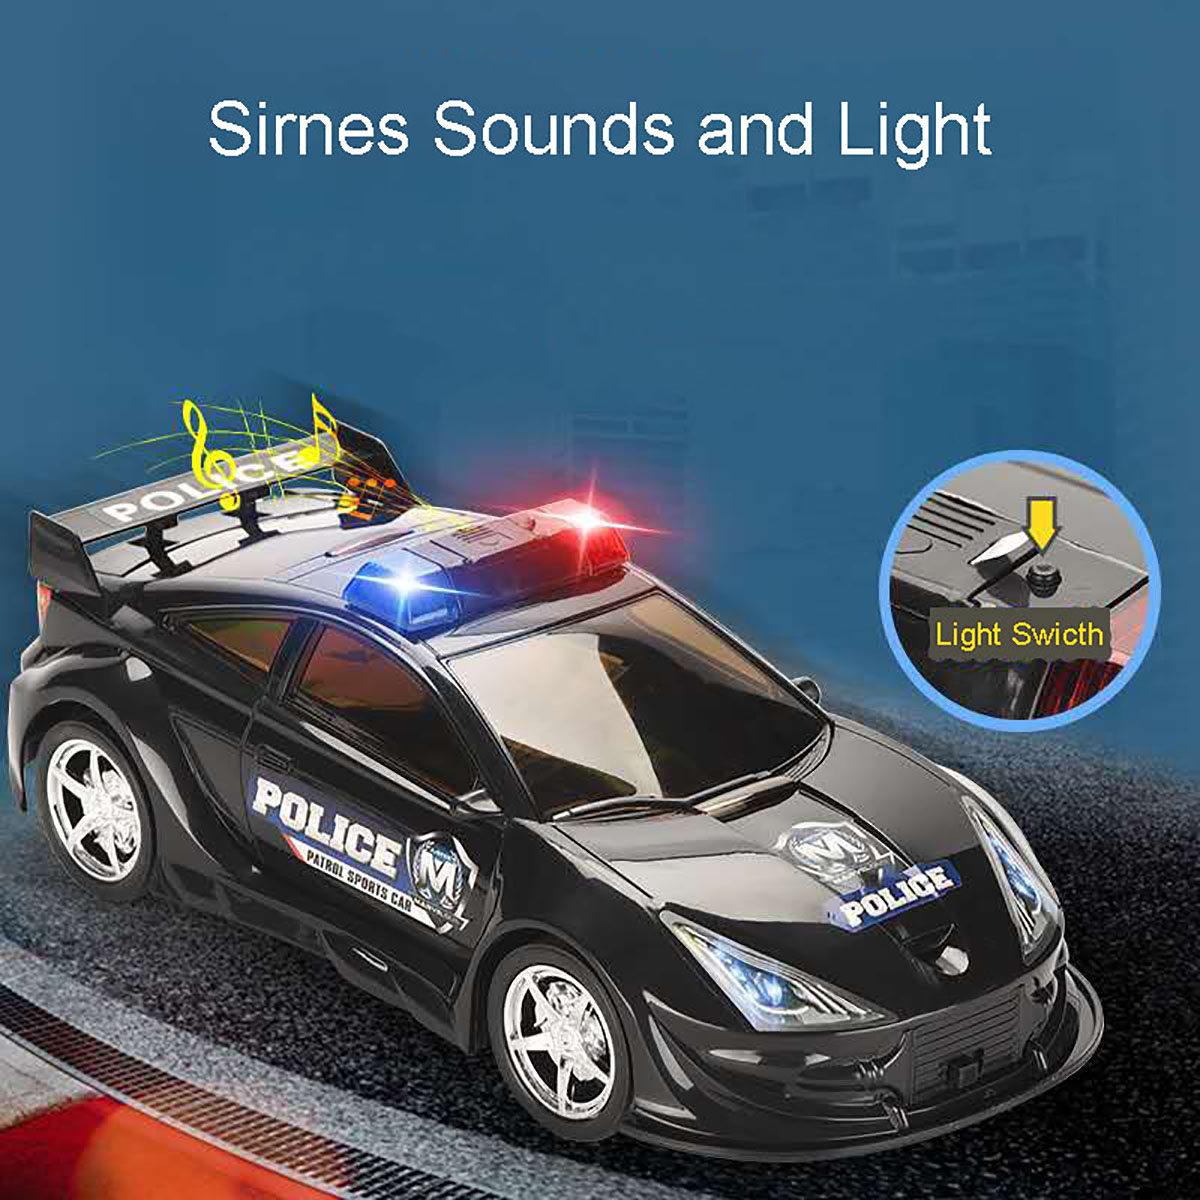 Simulation-Police-Car-Diecast-Vehicle-Model-Toy-with-Sirnes-Sound-and-Light-with-6-Cars-and-Game-Map-1805965-4